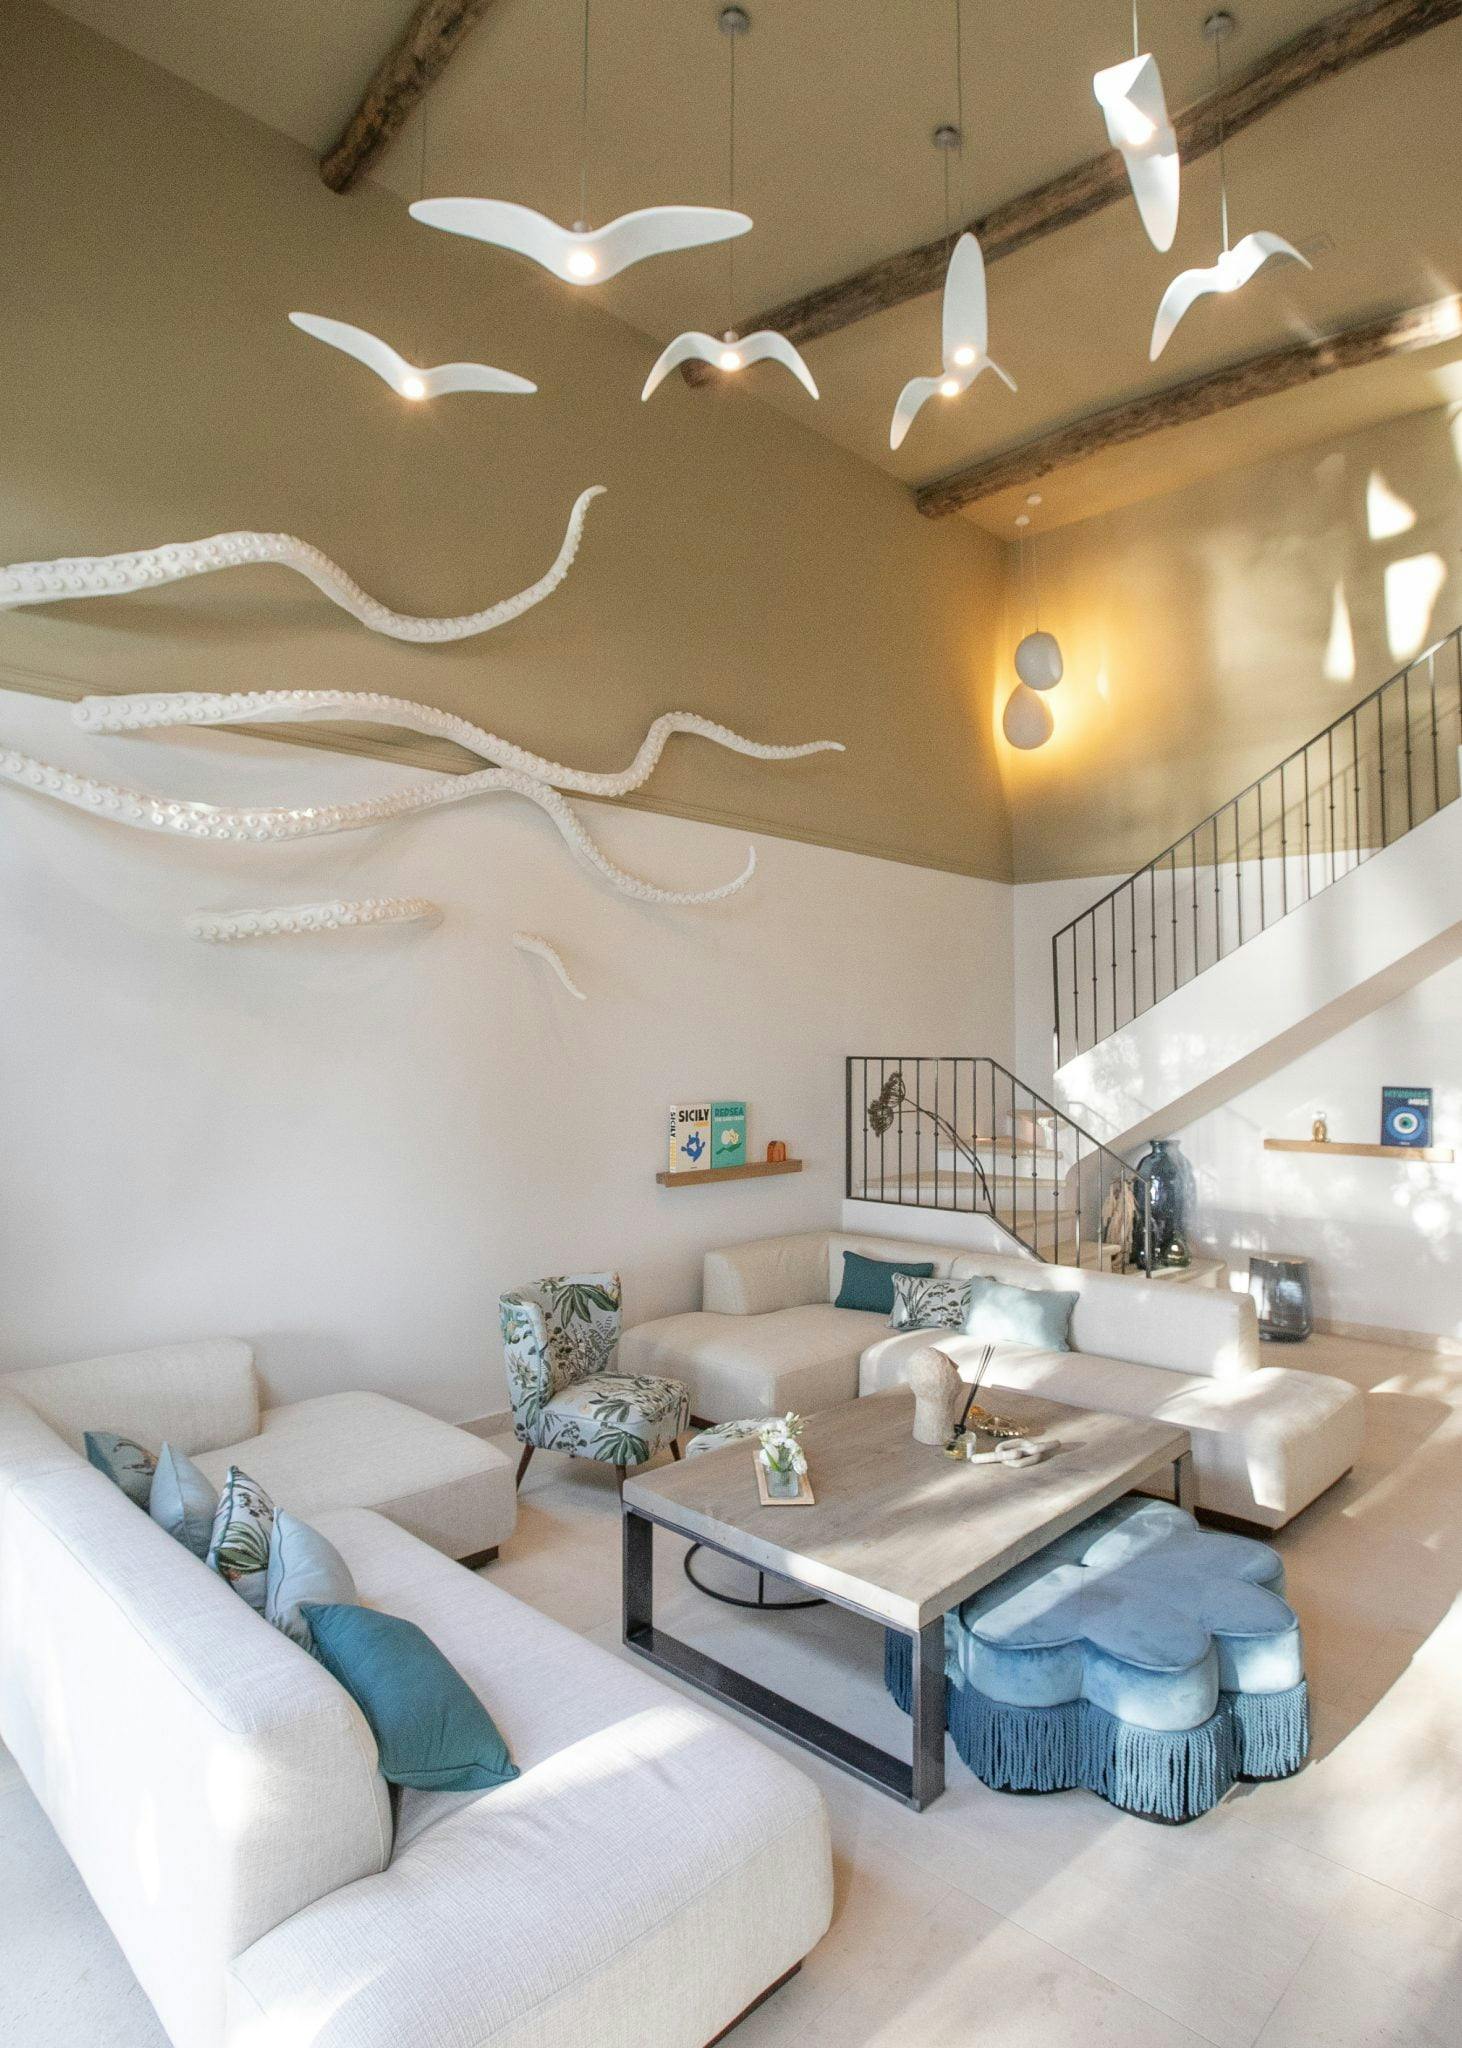 Living room decorated with an octopus sculpture on the wall, high ceilings, white sofas and hanging birds